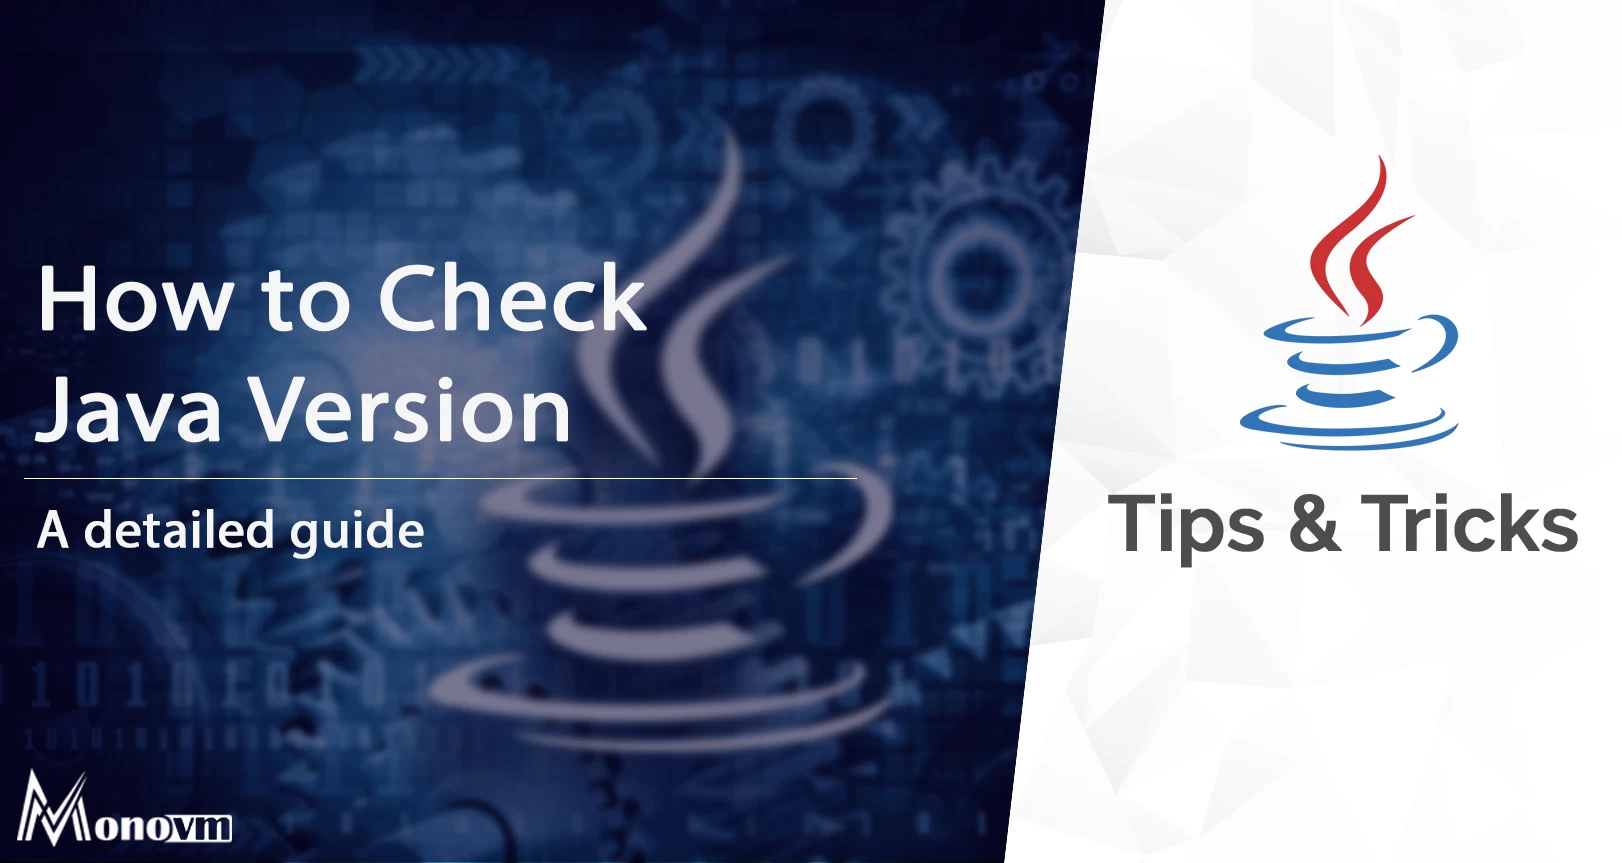 How to Check Java Version